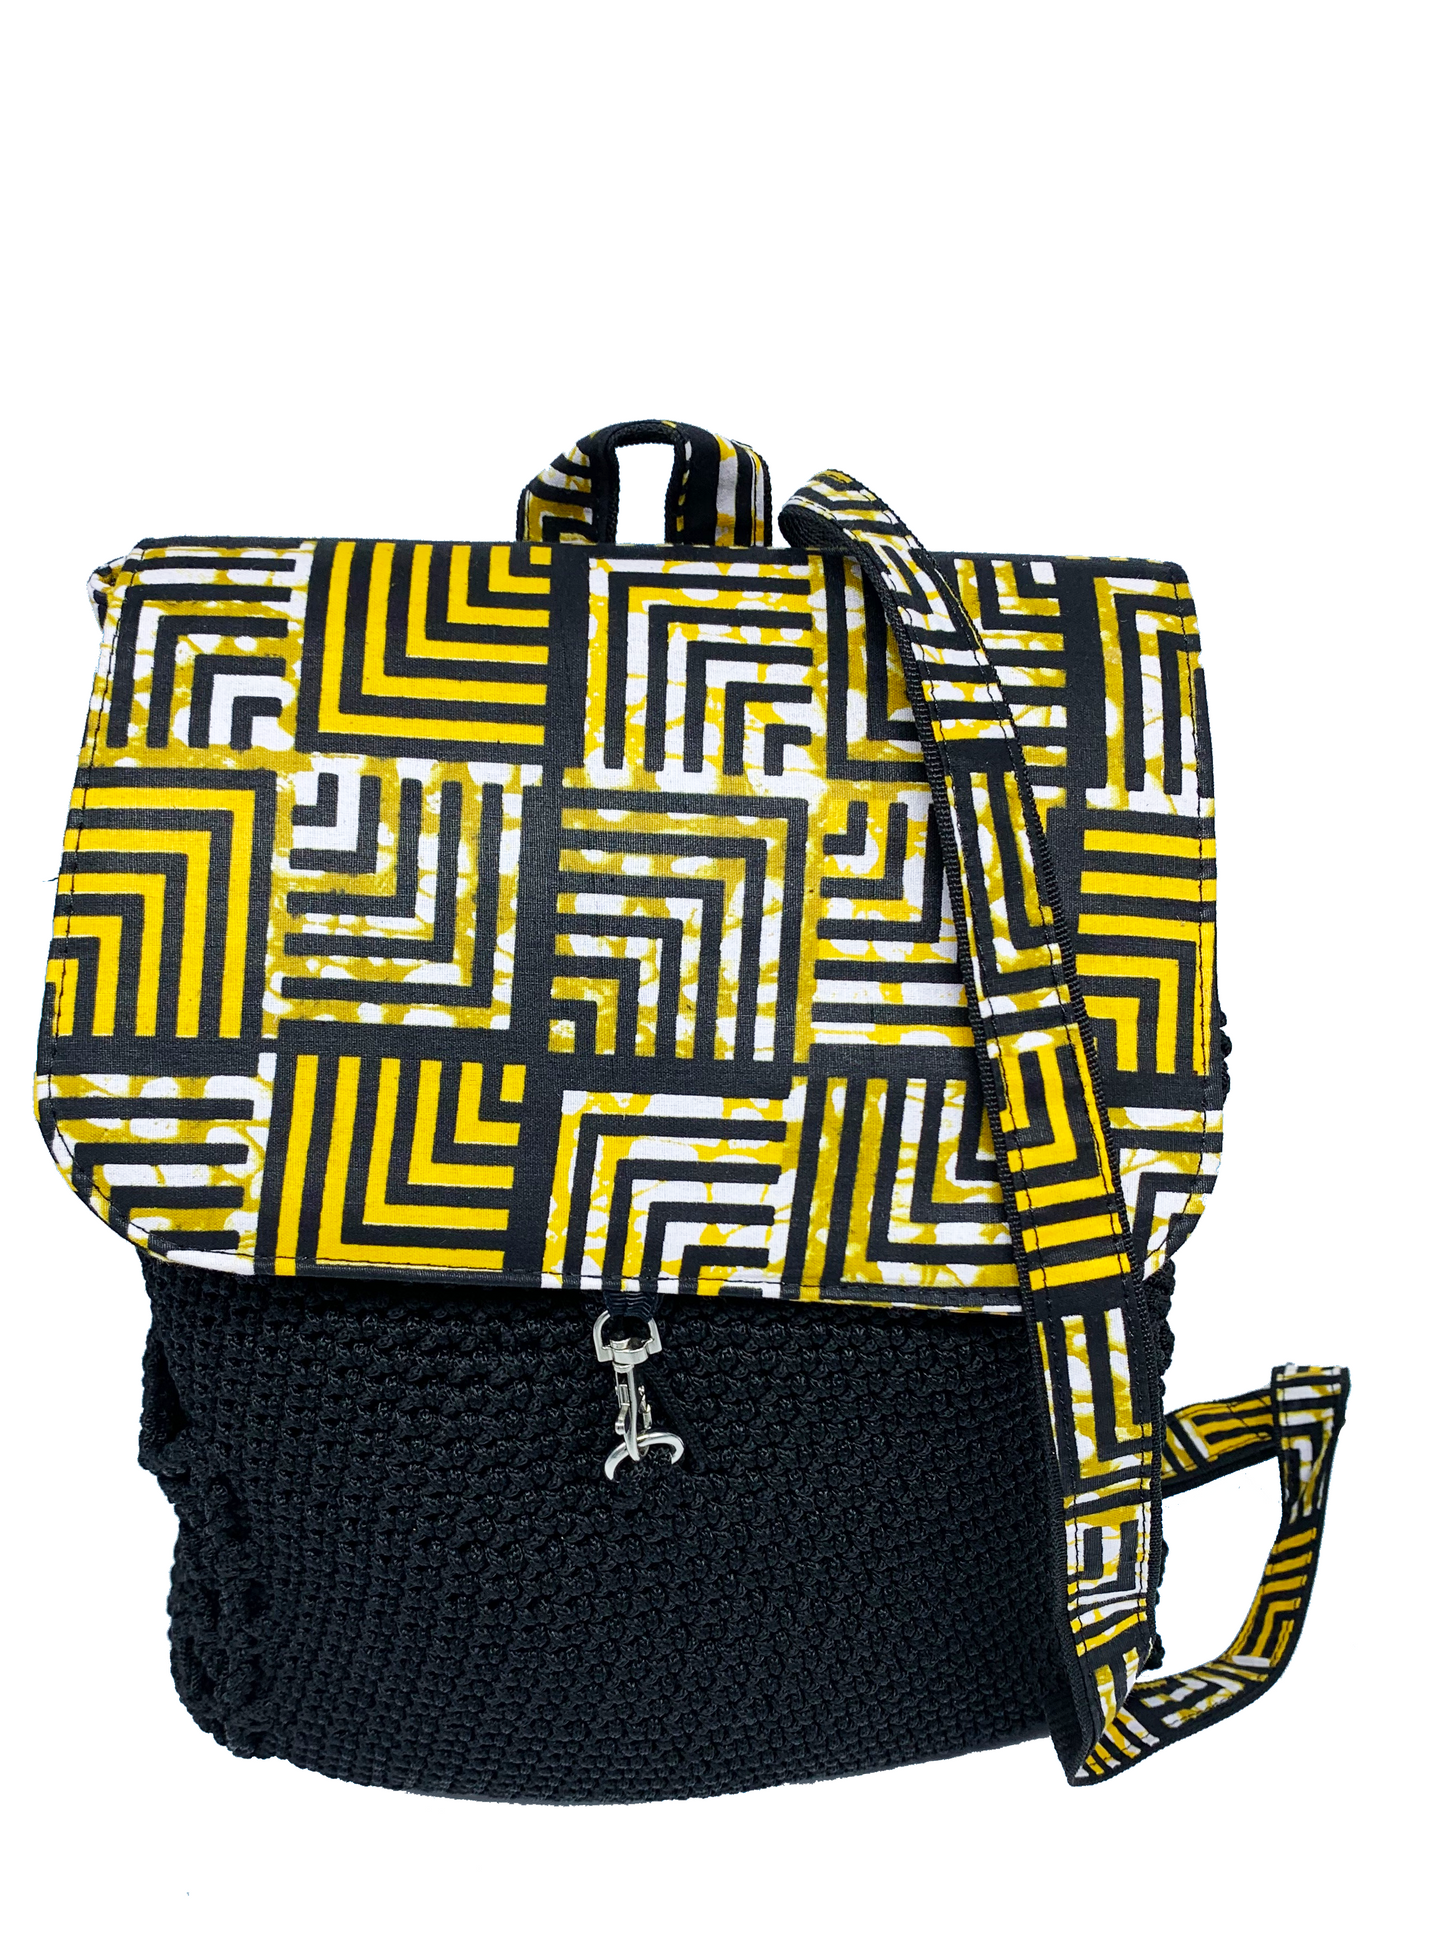 Cute Crochet Backpack with Ankara African Fabric - Weekend Bag for Mom. Boho Tote or Cross Body Duffle , Daughter Birthday, Back to School Gift